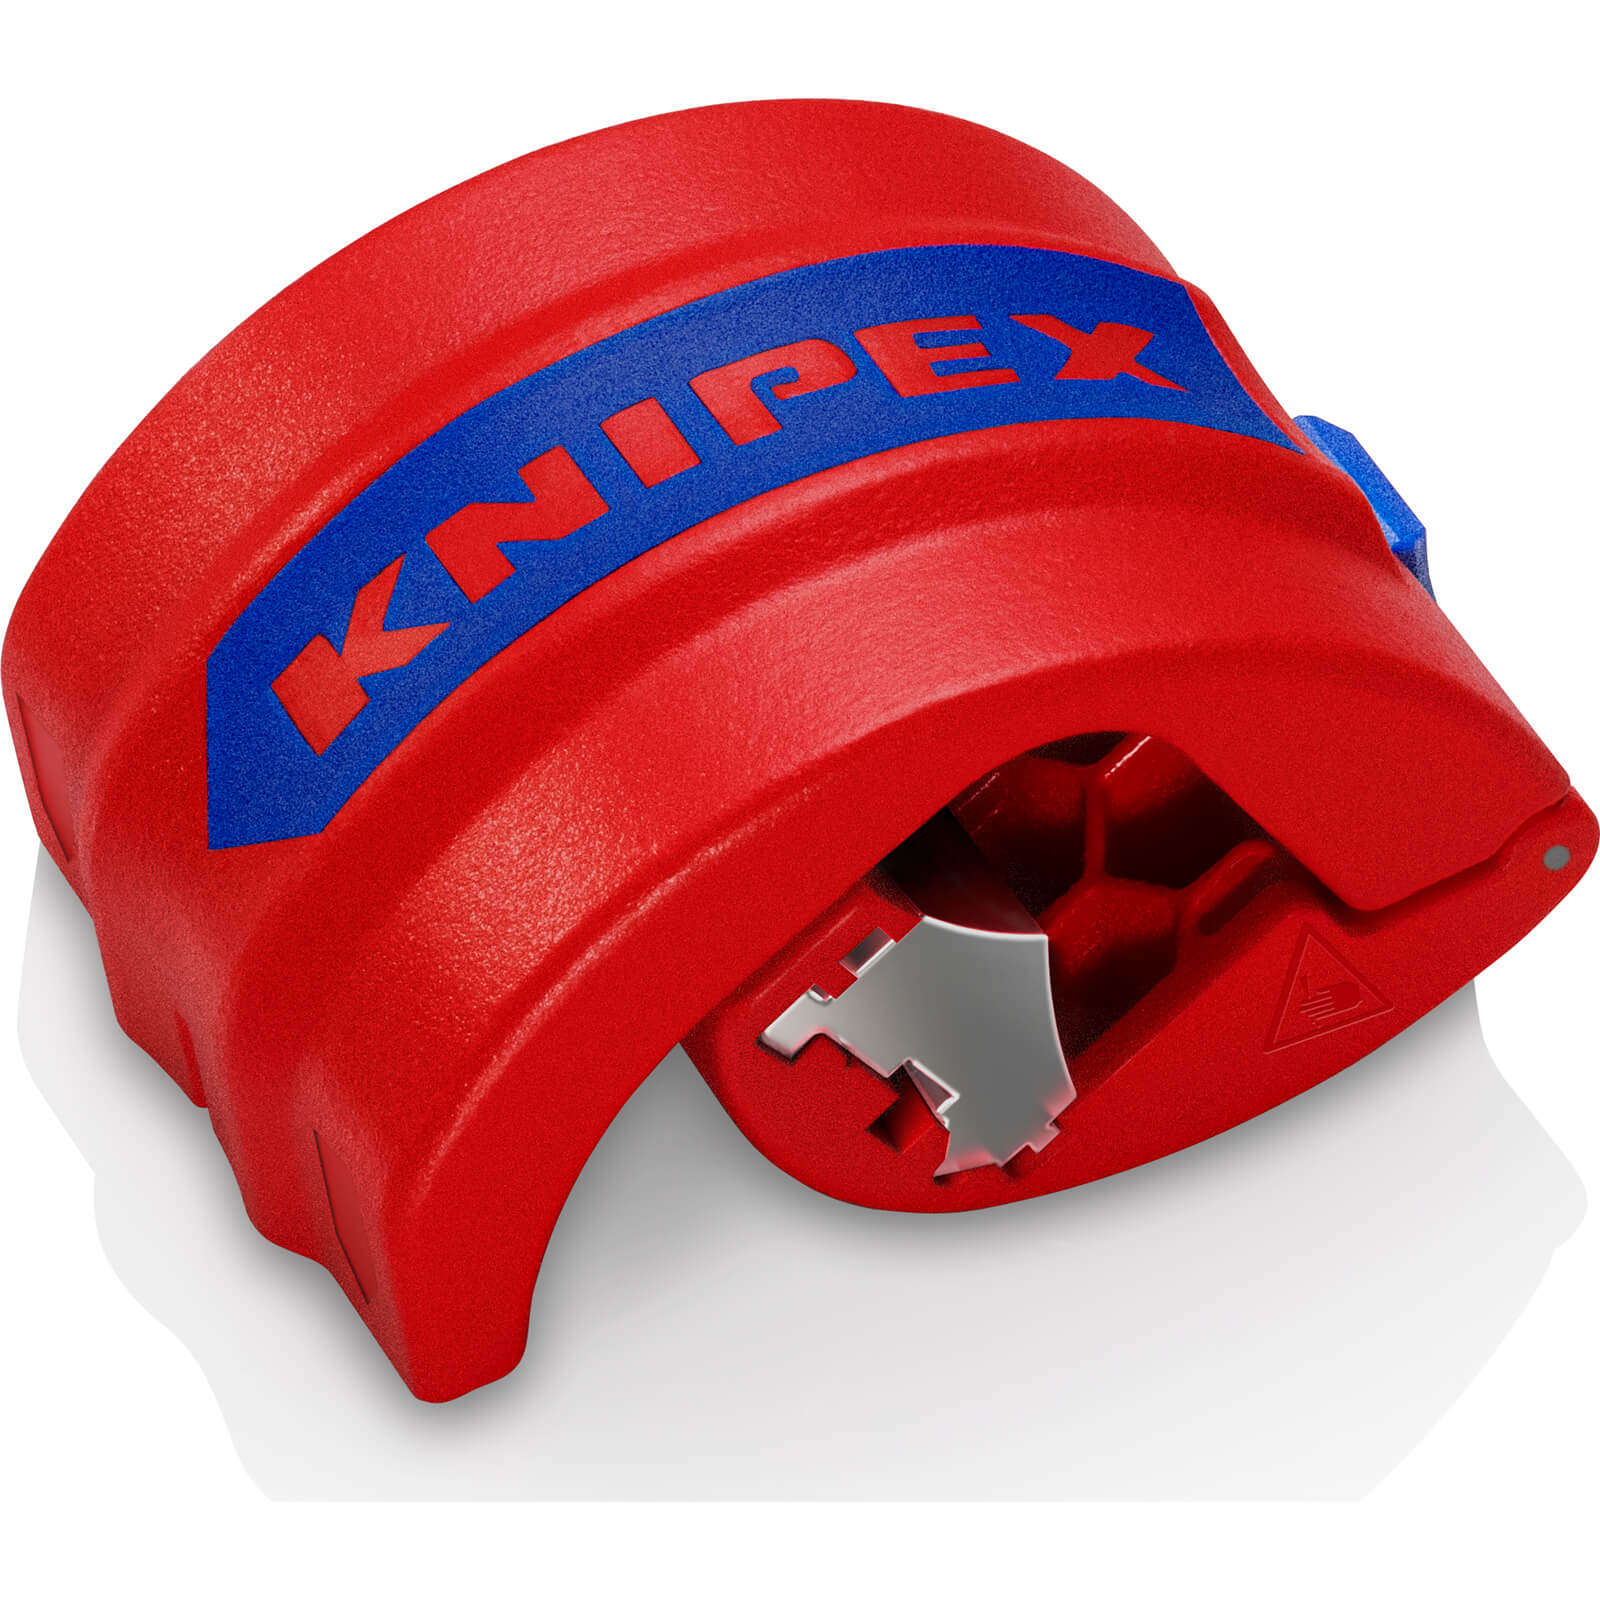 Image of Knipex 90 22 Bix Plastic Pipe and Tube Cutter 20mm - 50mm